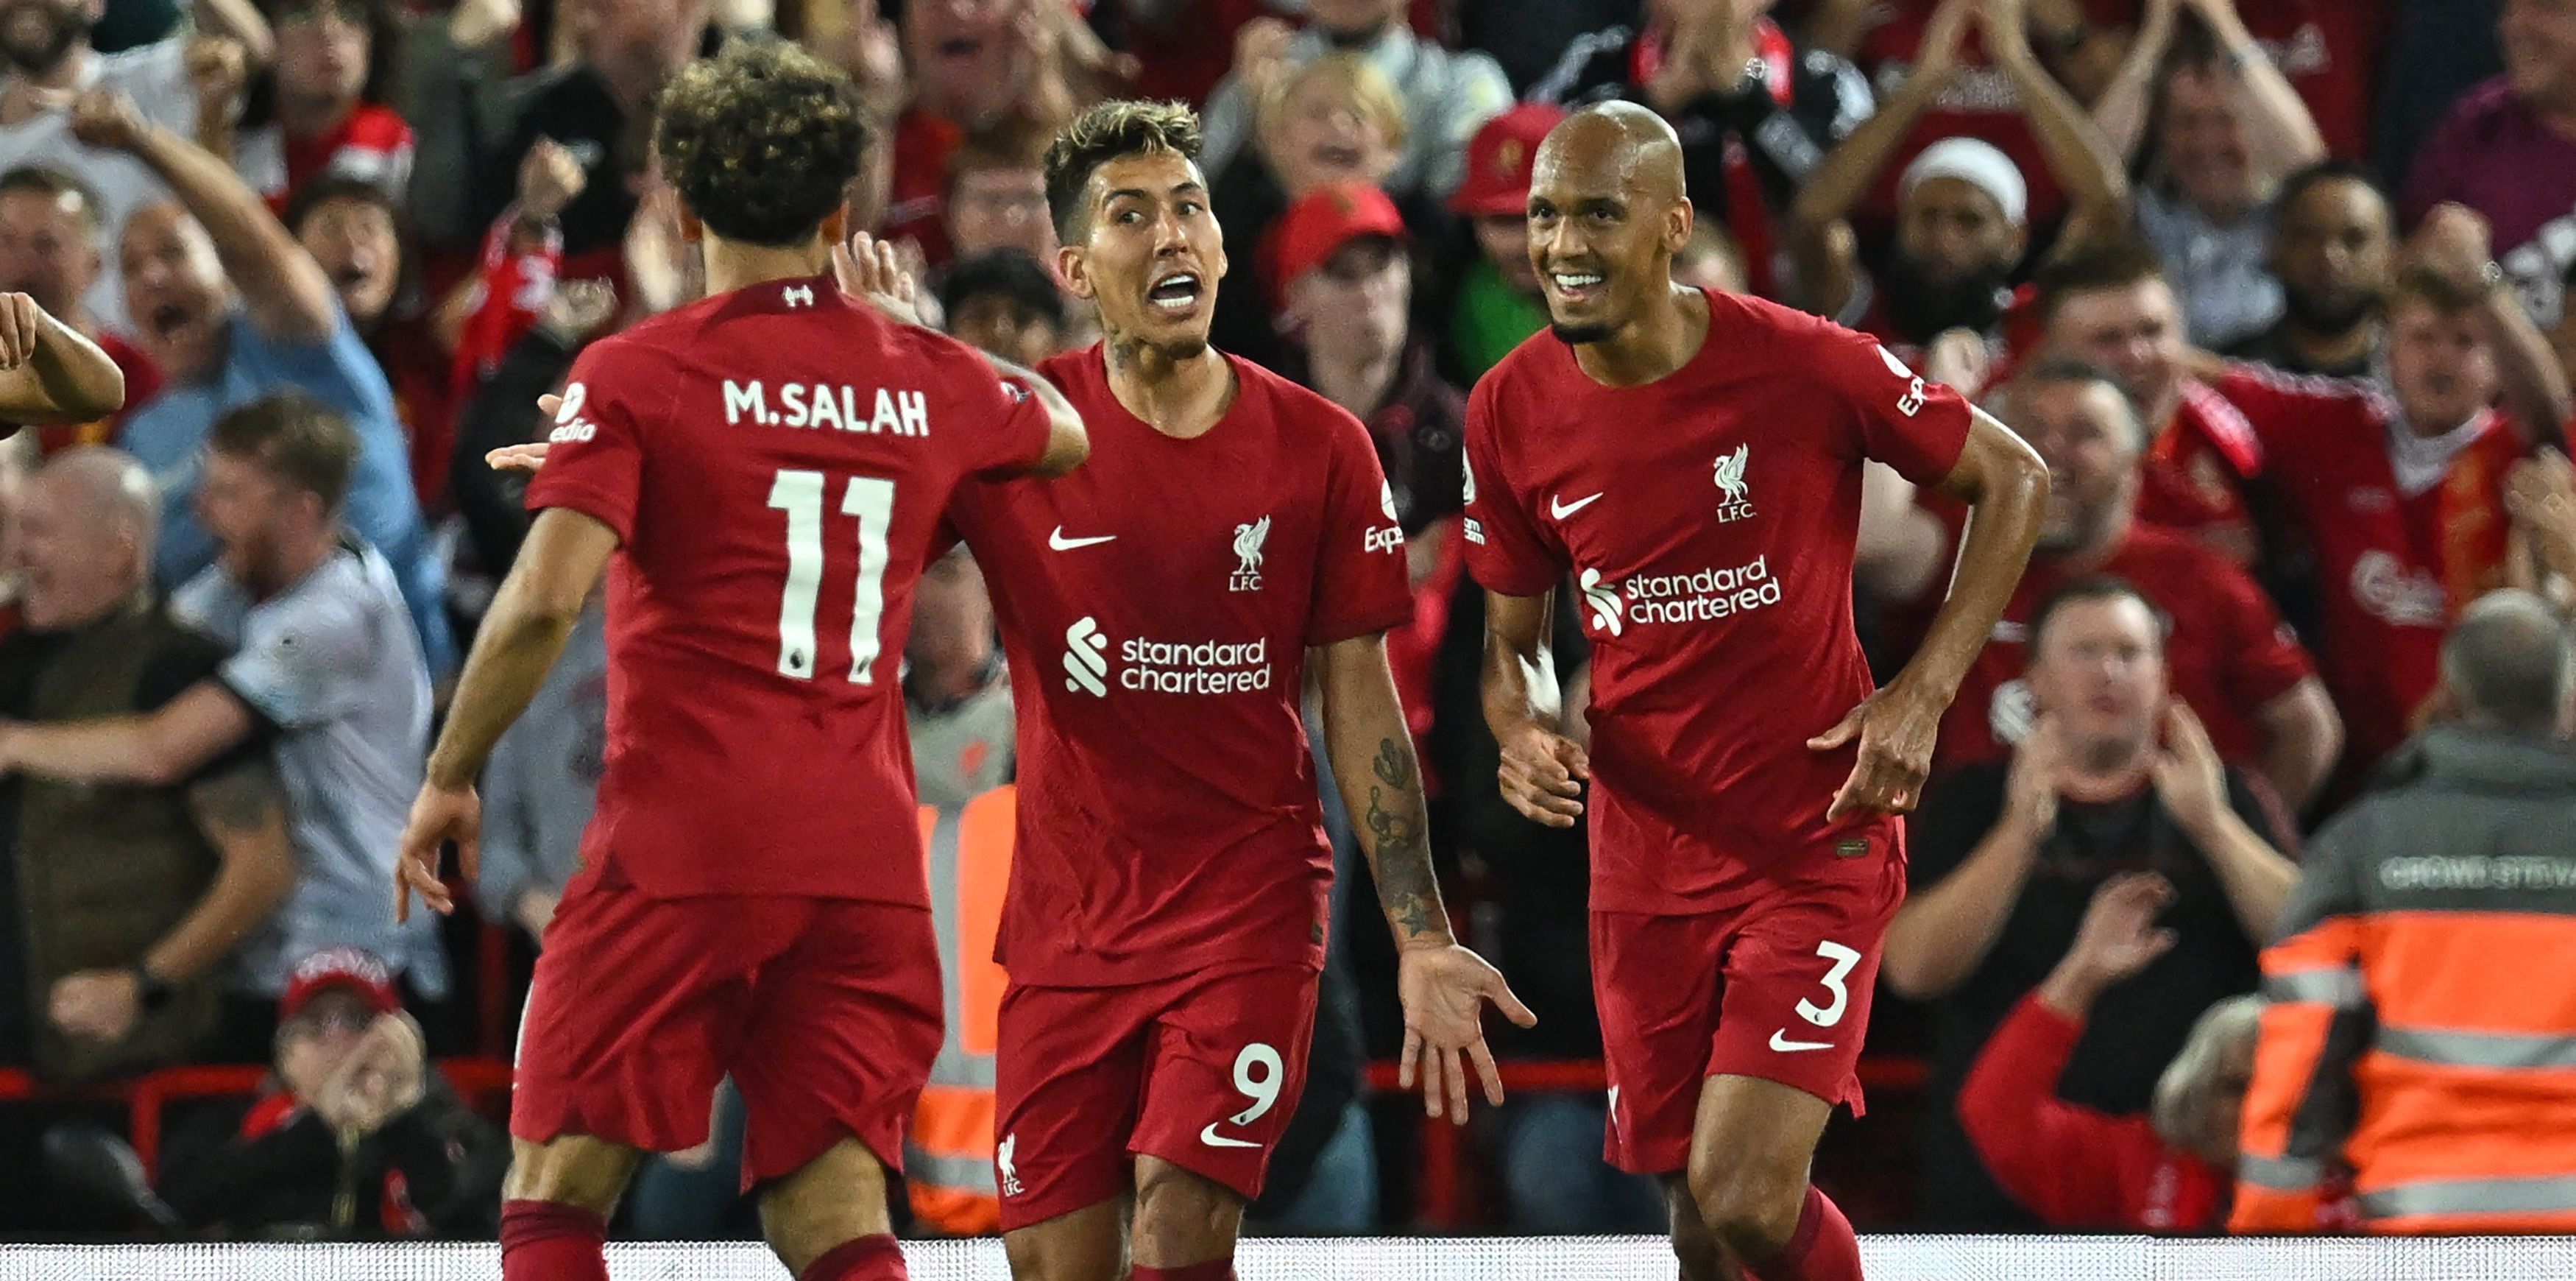 ‘Writing is on the wall’ – Pundit believes Liverpool star will leave club at the end of the season despite impressive start to campaign